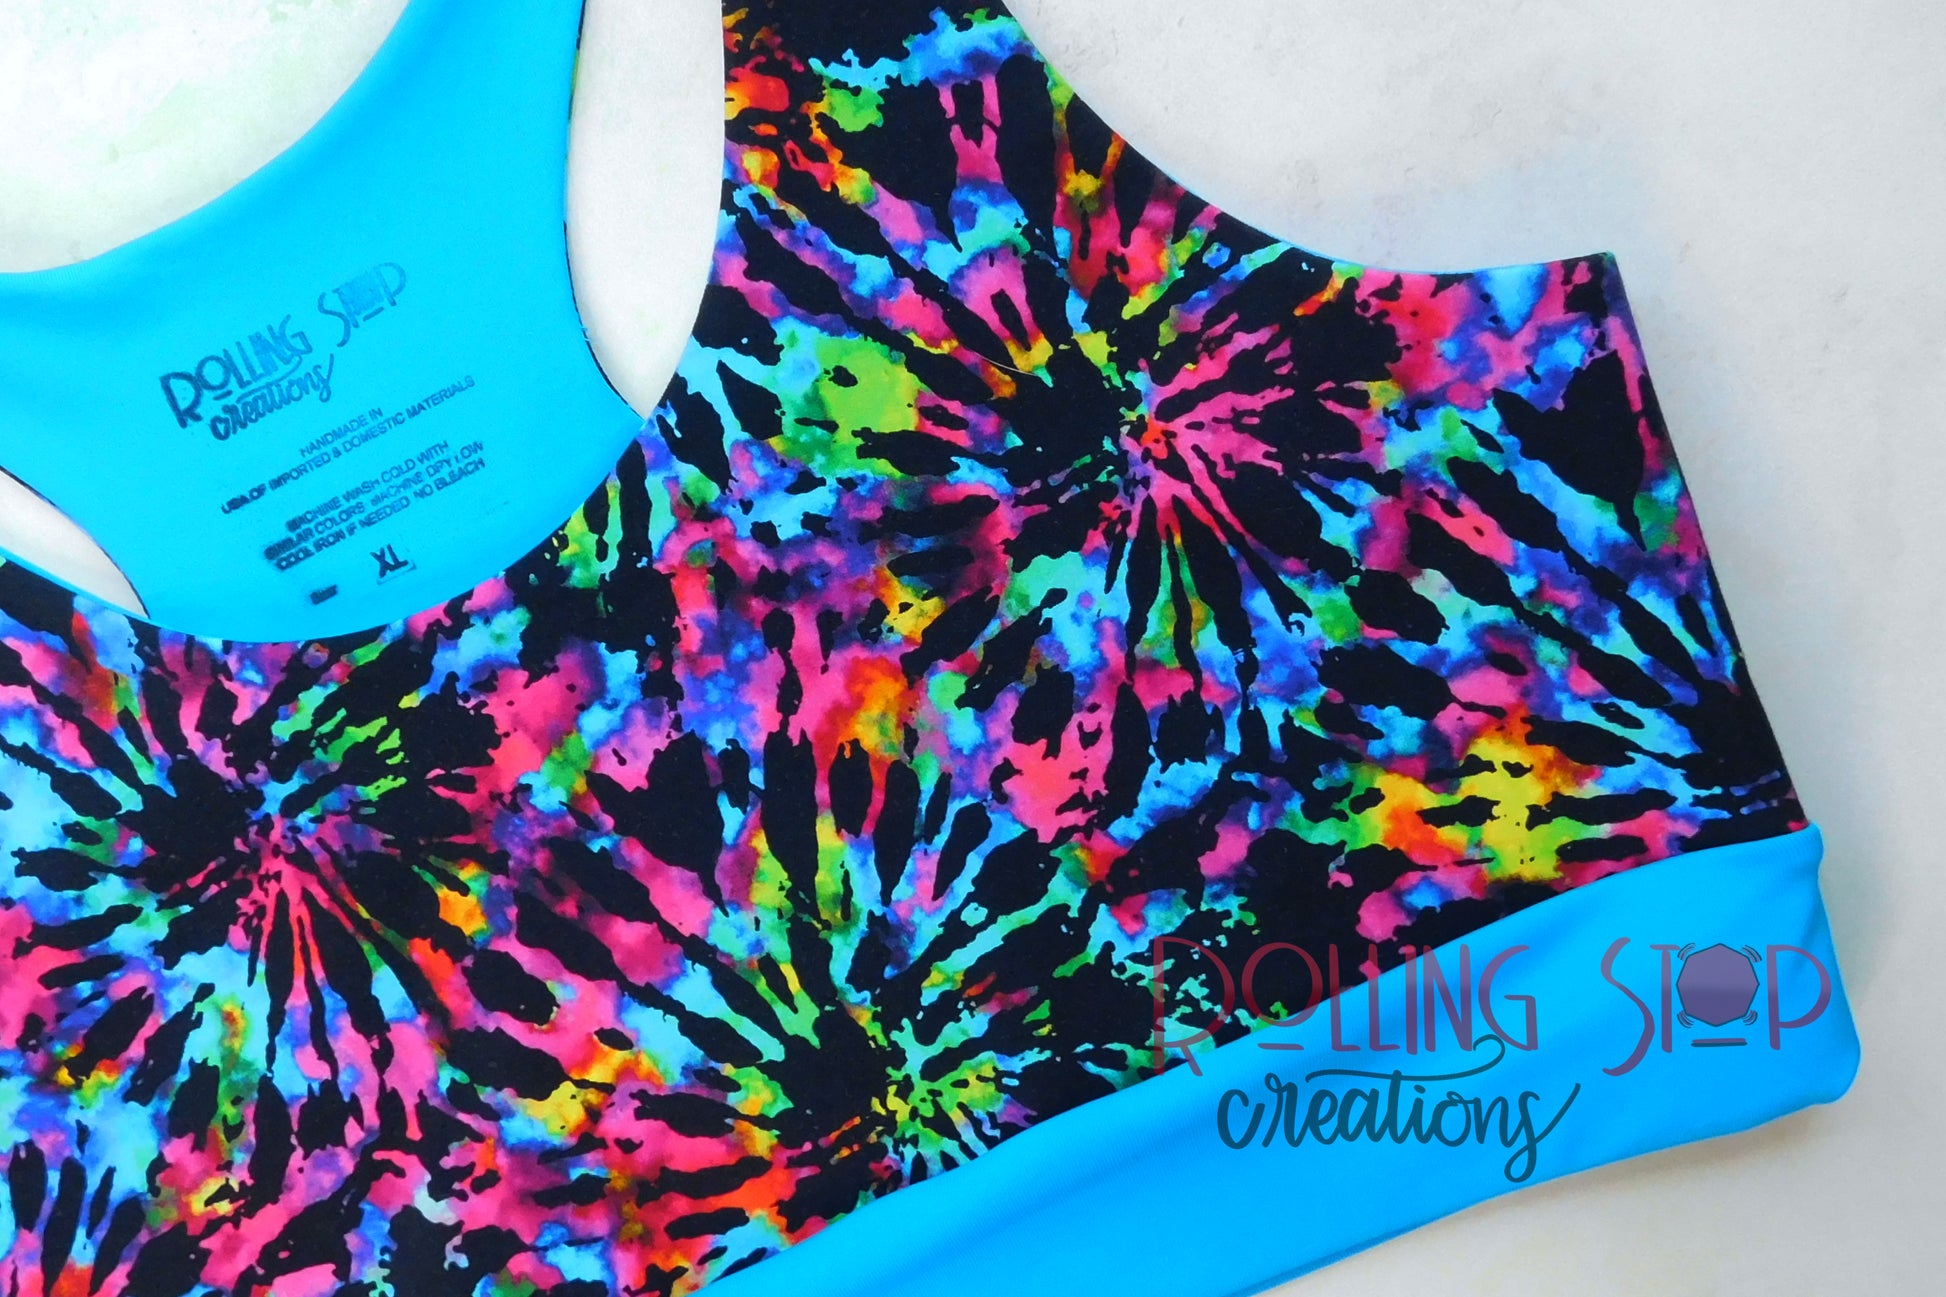 Jewel Tie Dye Comfy Bra by Rolling Stop Creations sold by Rolling Stop Creations Comfy Bra - Comfy Clothes - Lingerie